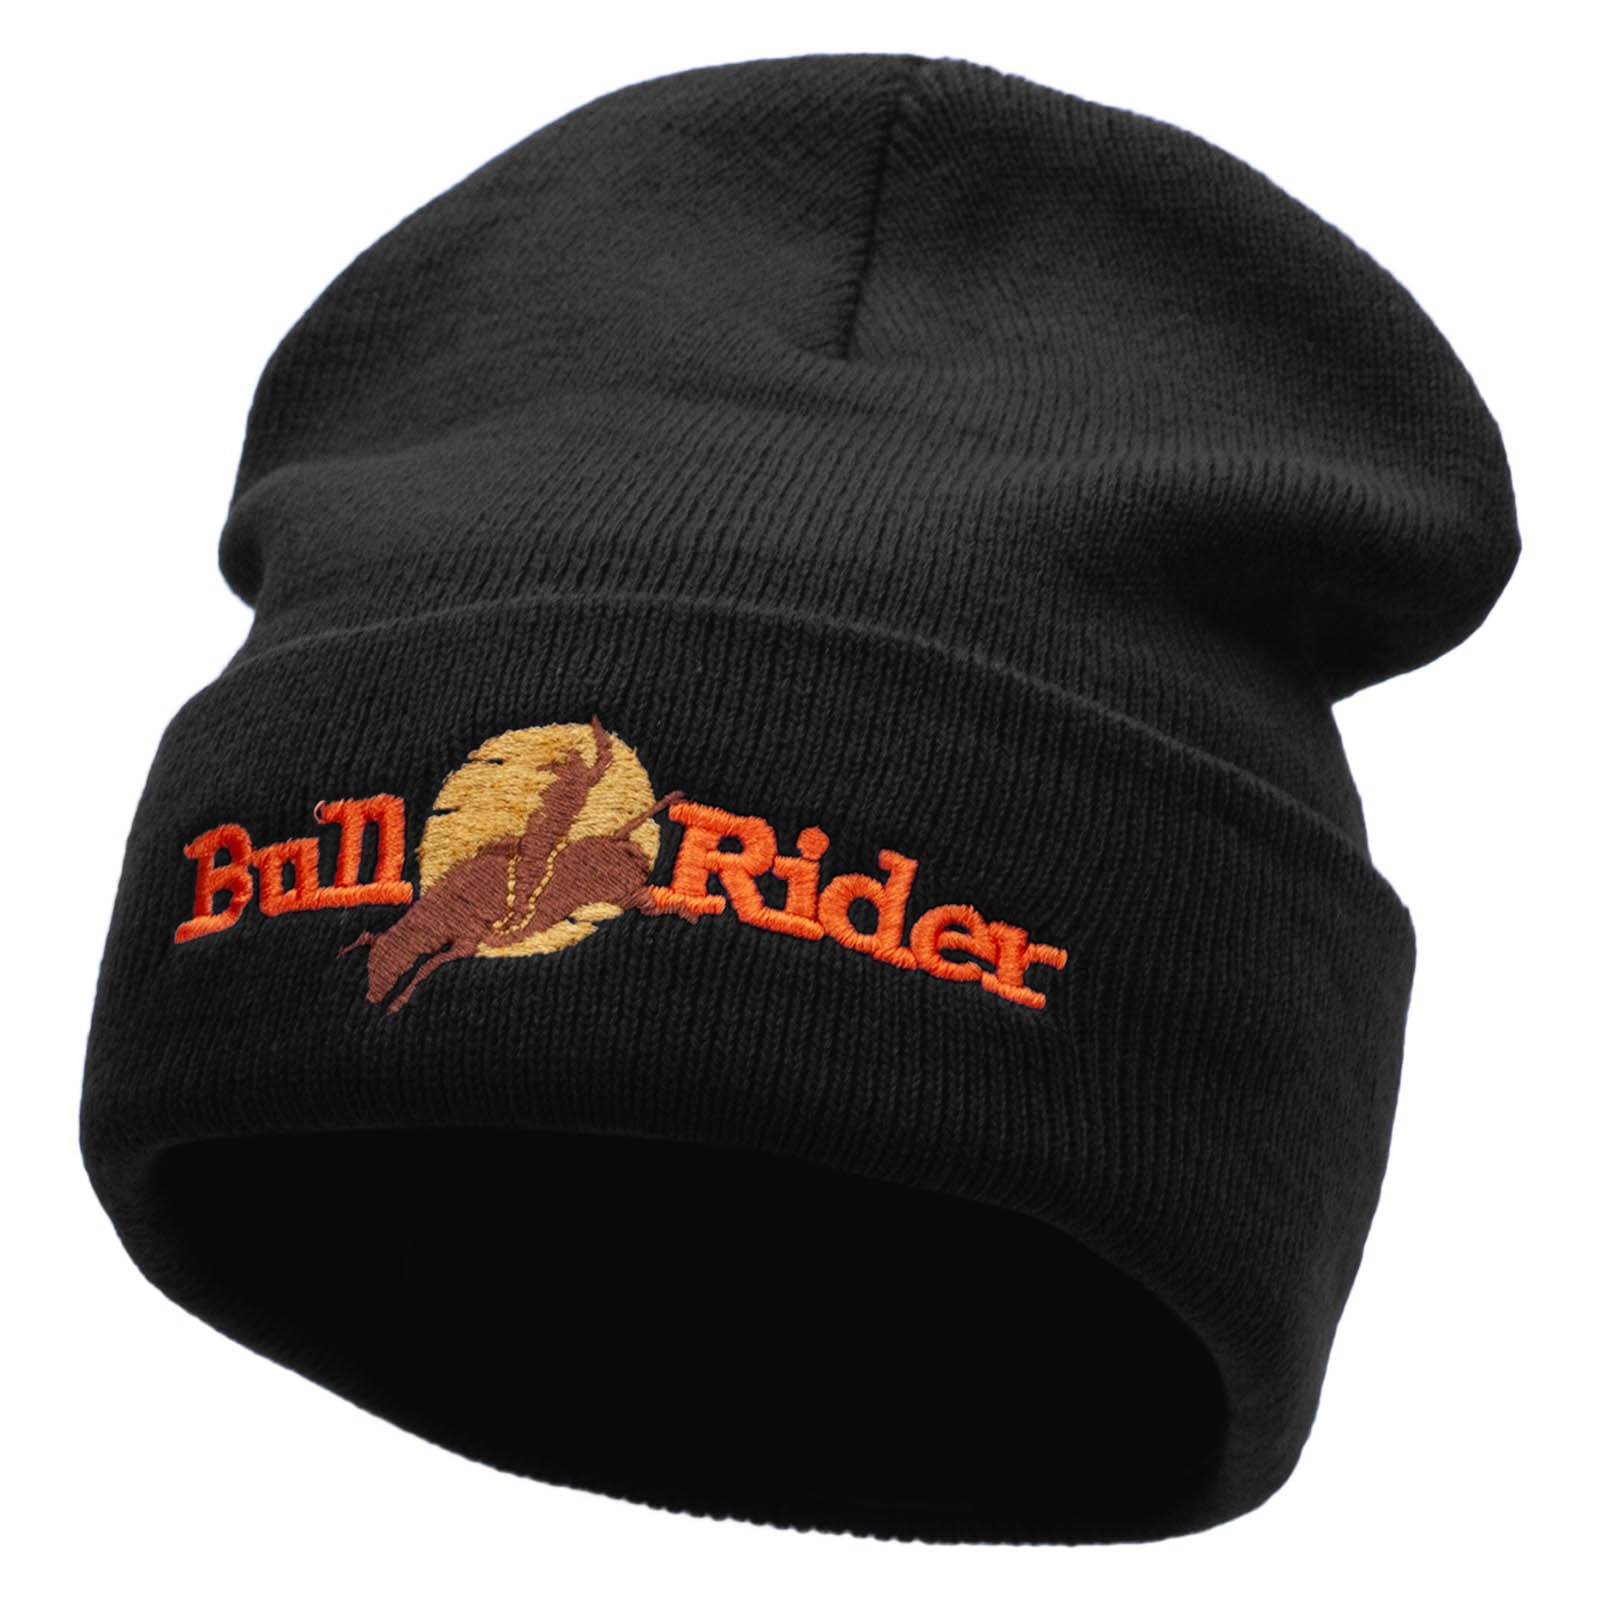 Bull Rider Embroidered 12 Inch Long Knitted Beanie - Black OSFM